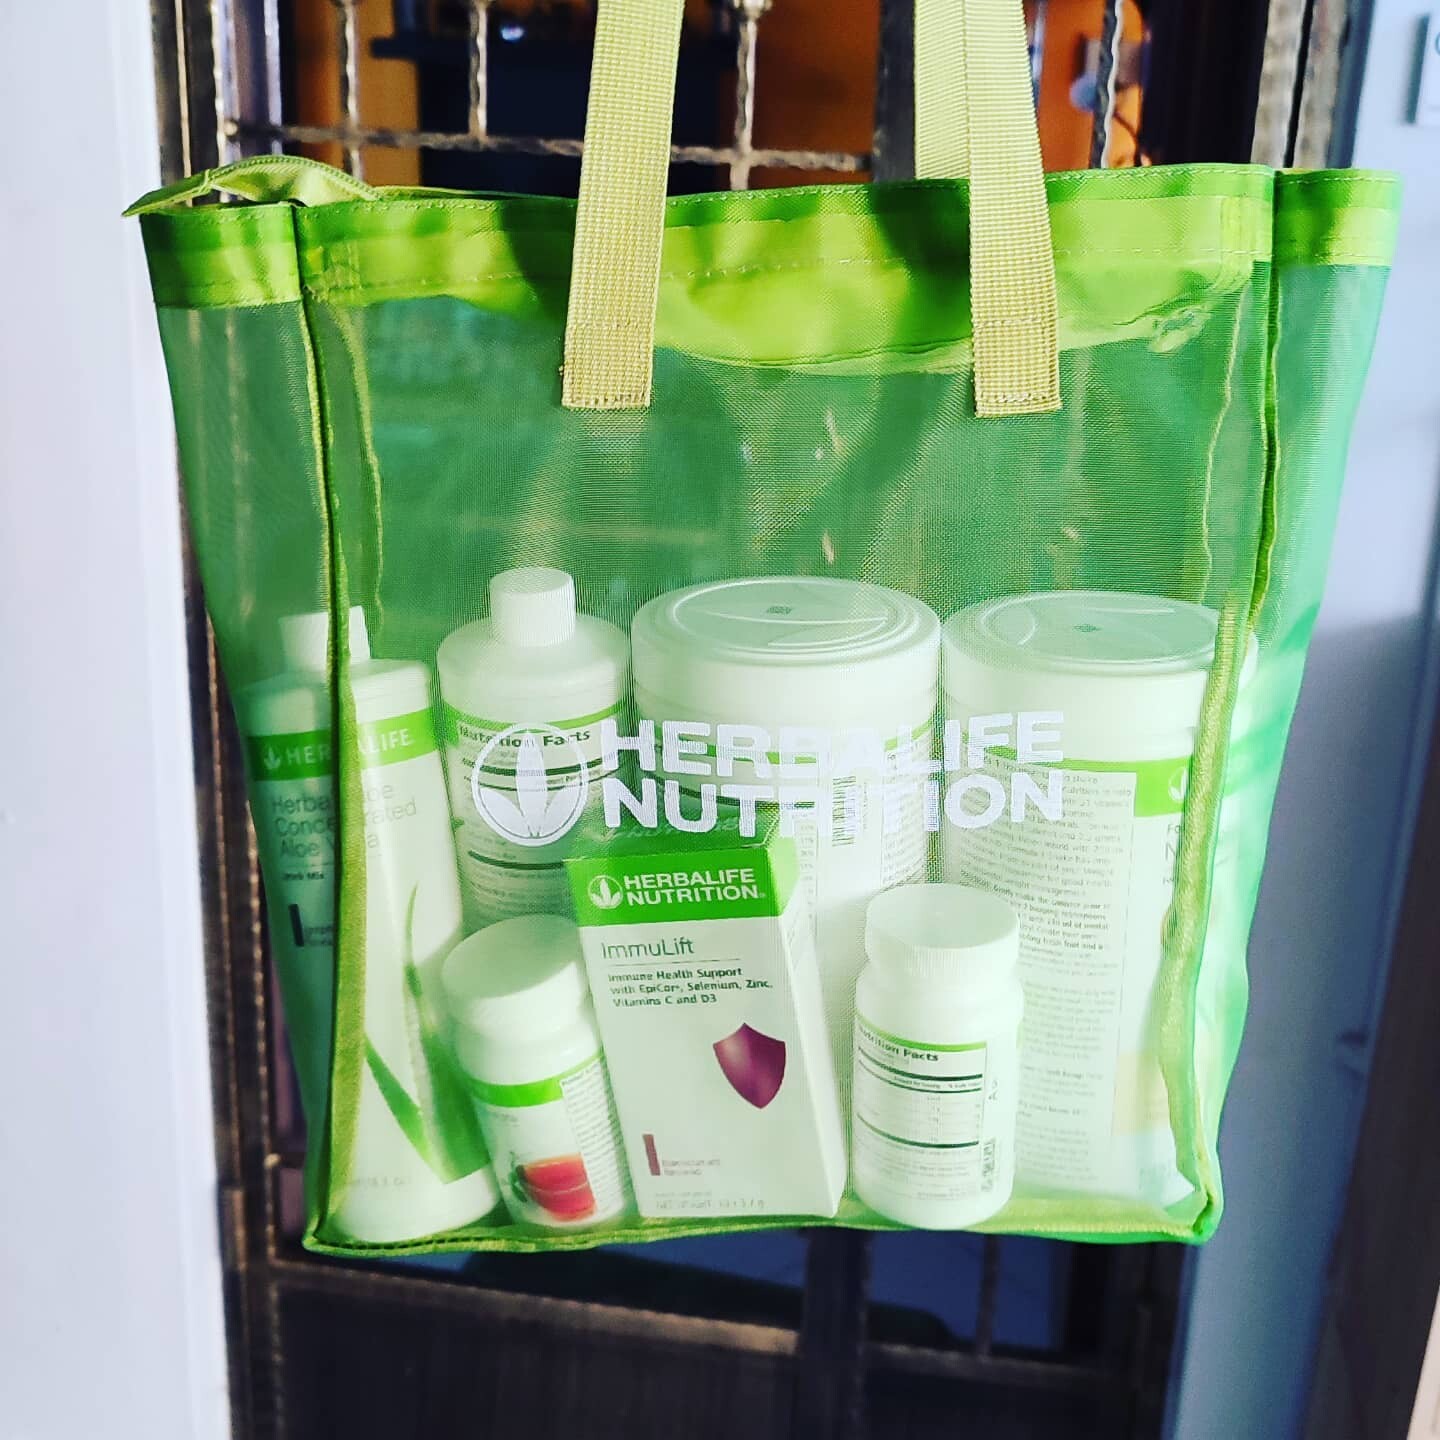 Another successful morning Herbalife nutrition delivery at Hougang, Singapore!

Customer loving the Herbalife ImmuLift that strengthens and optimize her family's immune system after having exposed to Covid-19 first hand.

Grab yours from official Herbalife distributors at https://activelifestyler.com/product/herbalife-immulift/

#herbalifenutritionsg #herbalifesingapore #herbalife #herbalifenutrition #activelifestyler